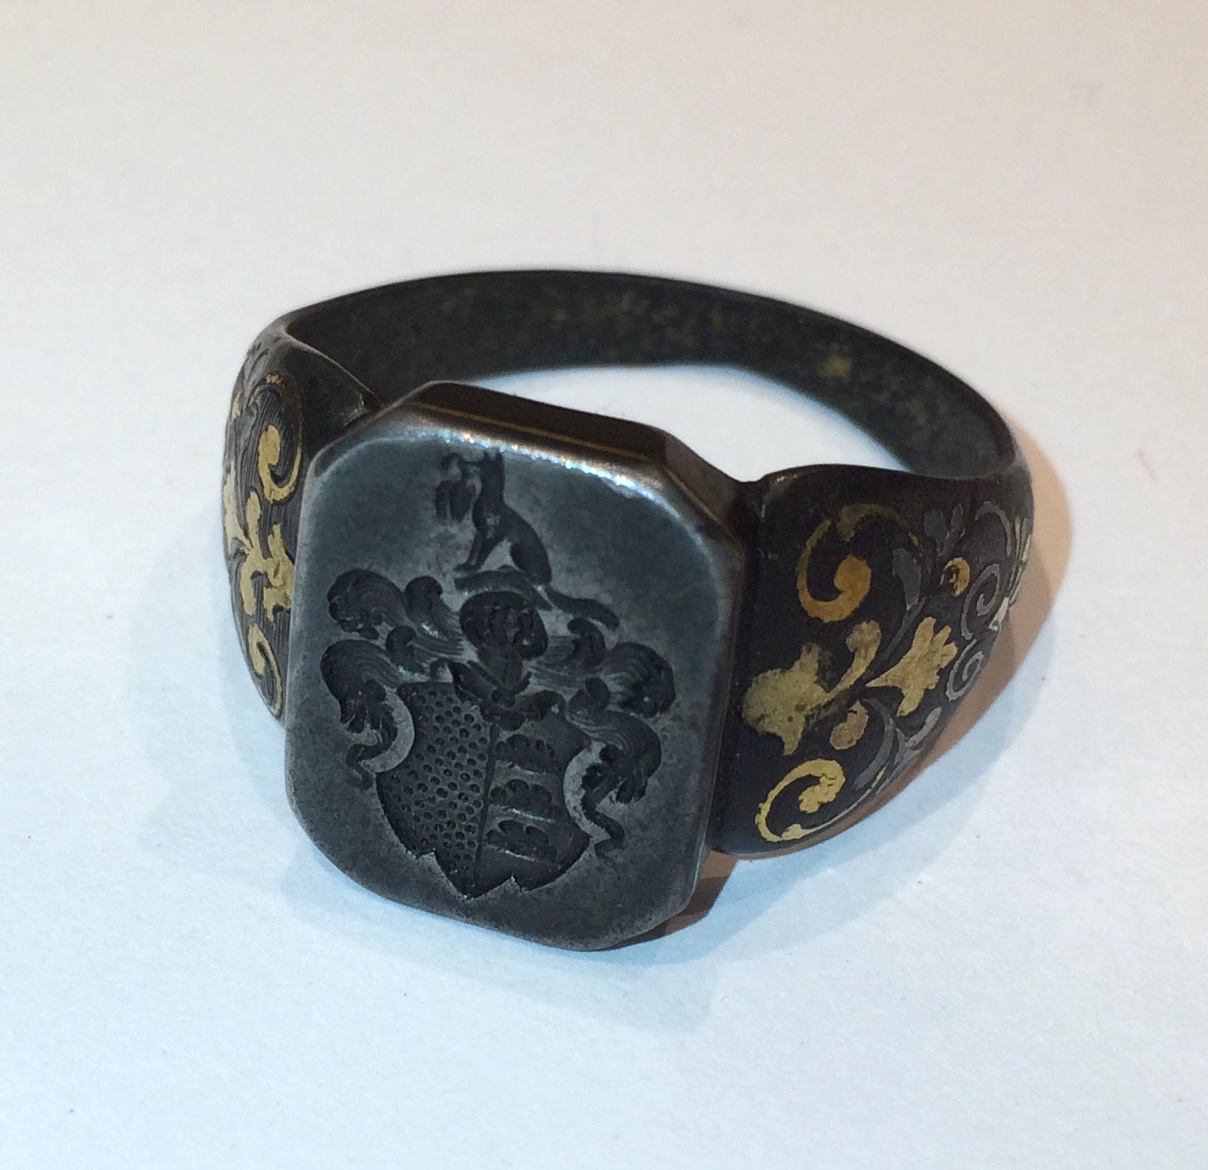 French Early 19th Century Heraldic Damascene iron and gold ring, c. 1800